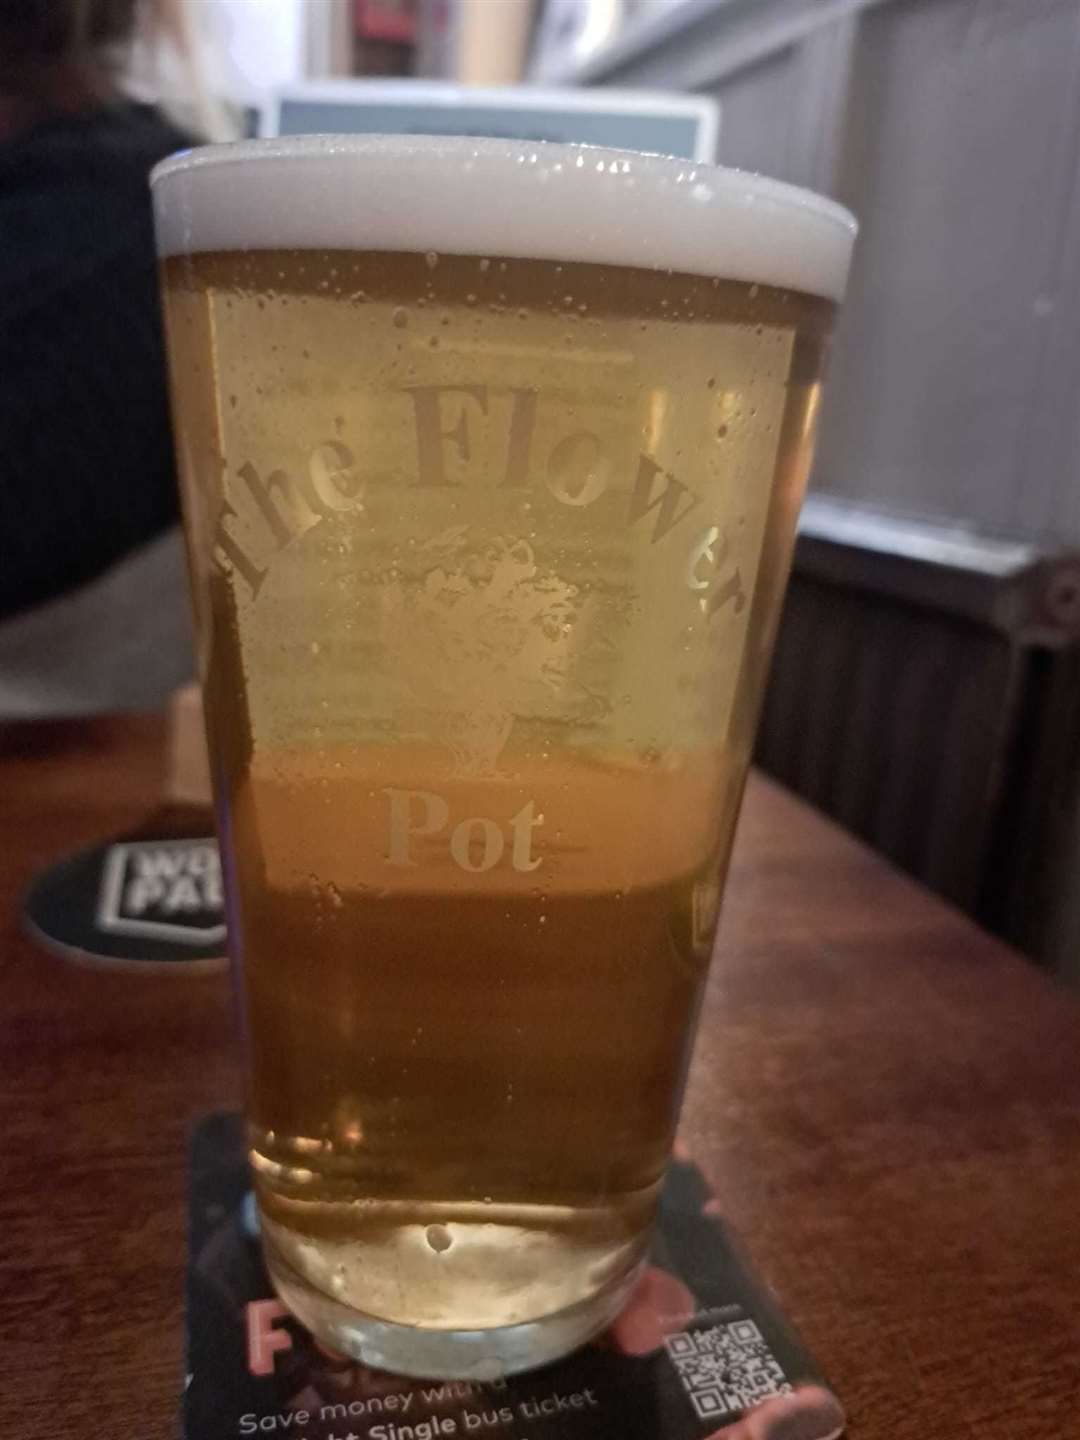 A pint of Jarl at The Flower Pot in Sandling Road, Maidstone